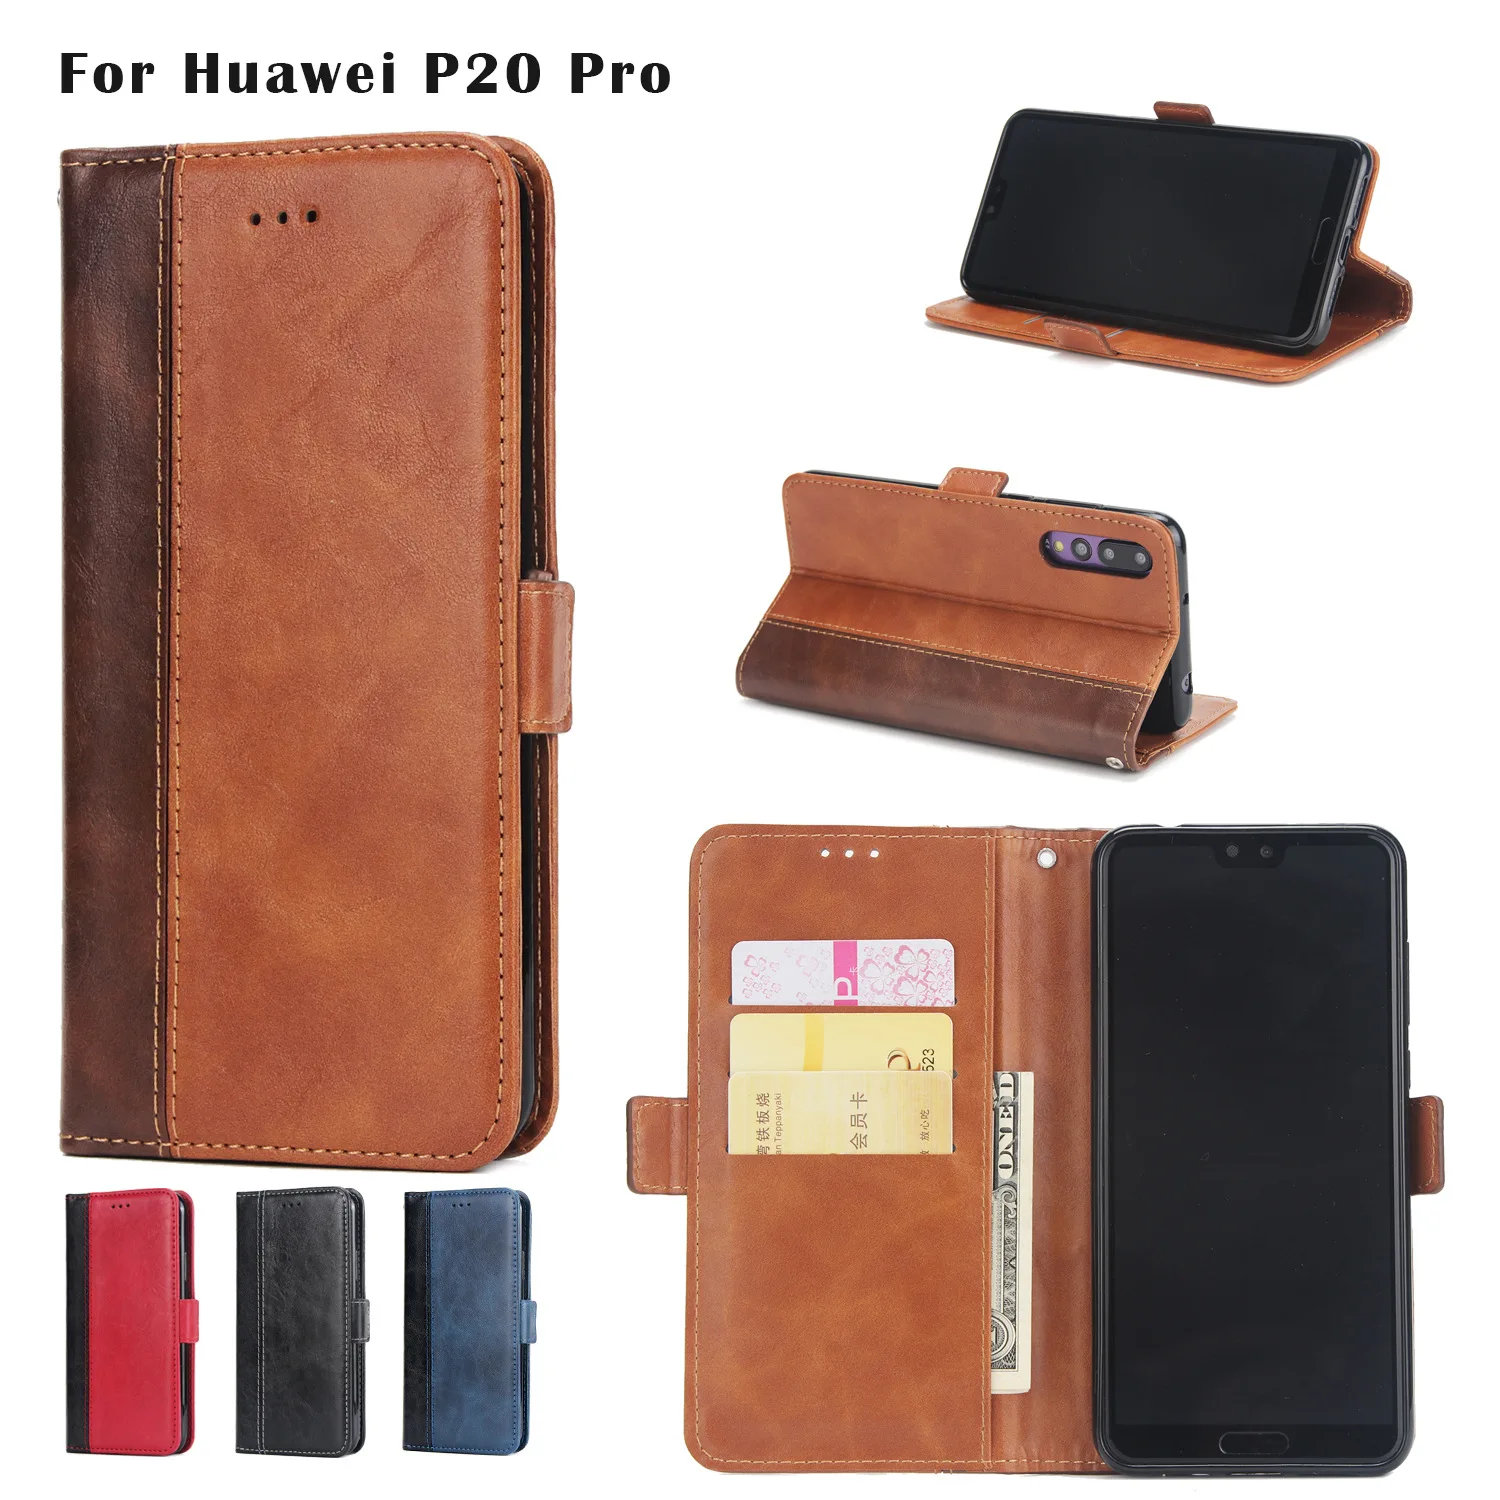 

30PCS Leather Flip Case For Huawei P20lite Card Slots Wallet Cover For Huawei P20pro Phone Case Coque Funda